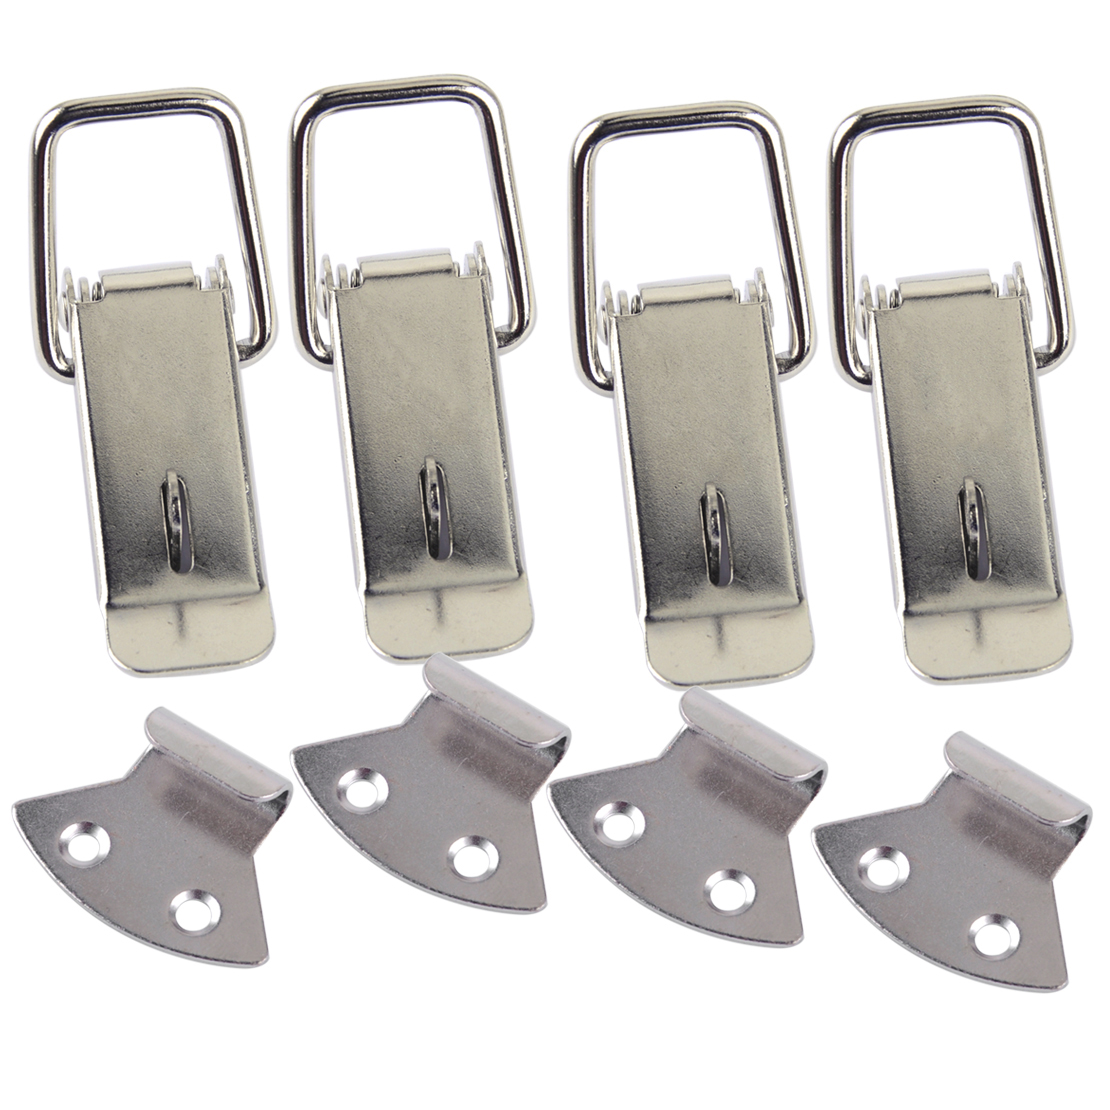 4x Spring Loaded Tone Toggle Latch Hasp Lock fit for Case Box Draw Chest Toolbox 